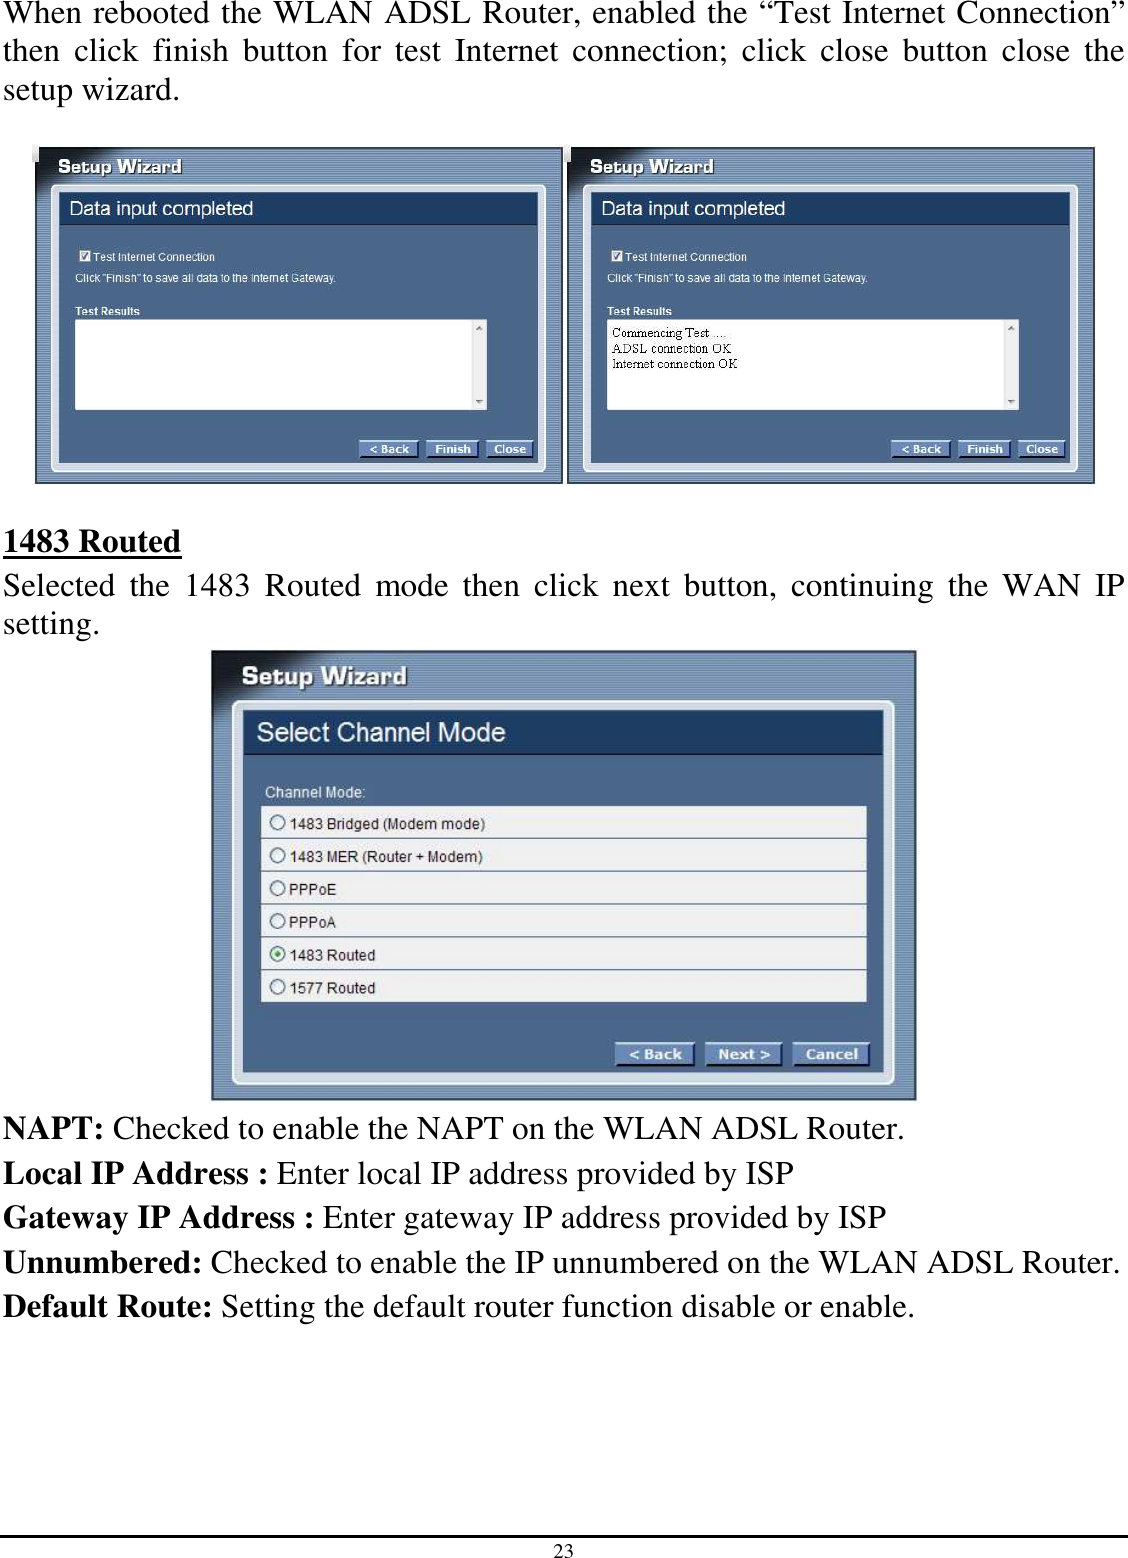 23 When rebooted the WLAN ADSL Router, enabled the “Test Internet Connection” then  click  finish  button  for  test  Internet  connection;  click  close  button  close  the setup wizard.    1483 Routed Selected  the  1483  Routed  mode  then  click  next  button,  continuing  the  WAN  IP setting.  NAPT: Checked to enable the NAPT on the WLAN ADSL Router. Local IP Address : Enter local IP address provided by ISP Gateway IP Address : Enter gateway IP address provided by ISP Unnumbered: Checked to enable the IP unnumbered on the WLAN ADSL Router. Default Route: Setting the default router function disable or enable.   